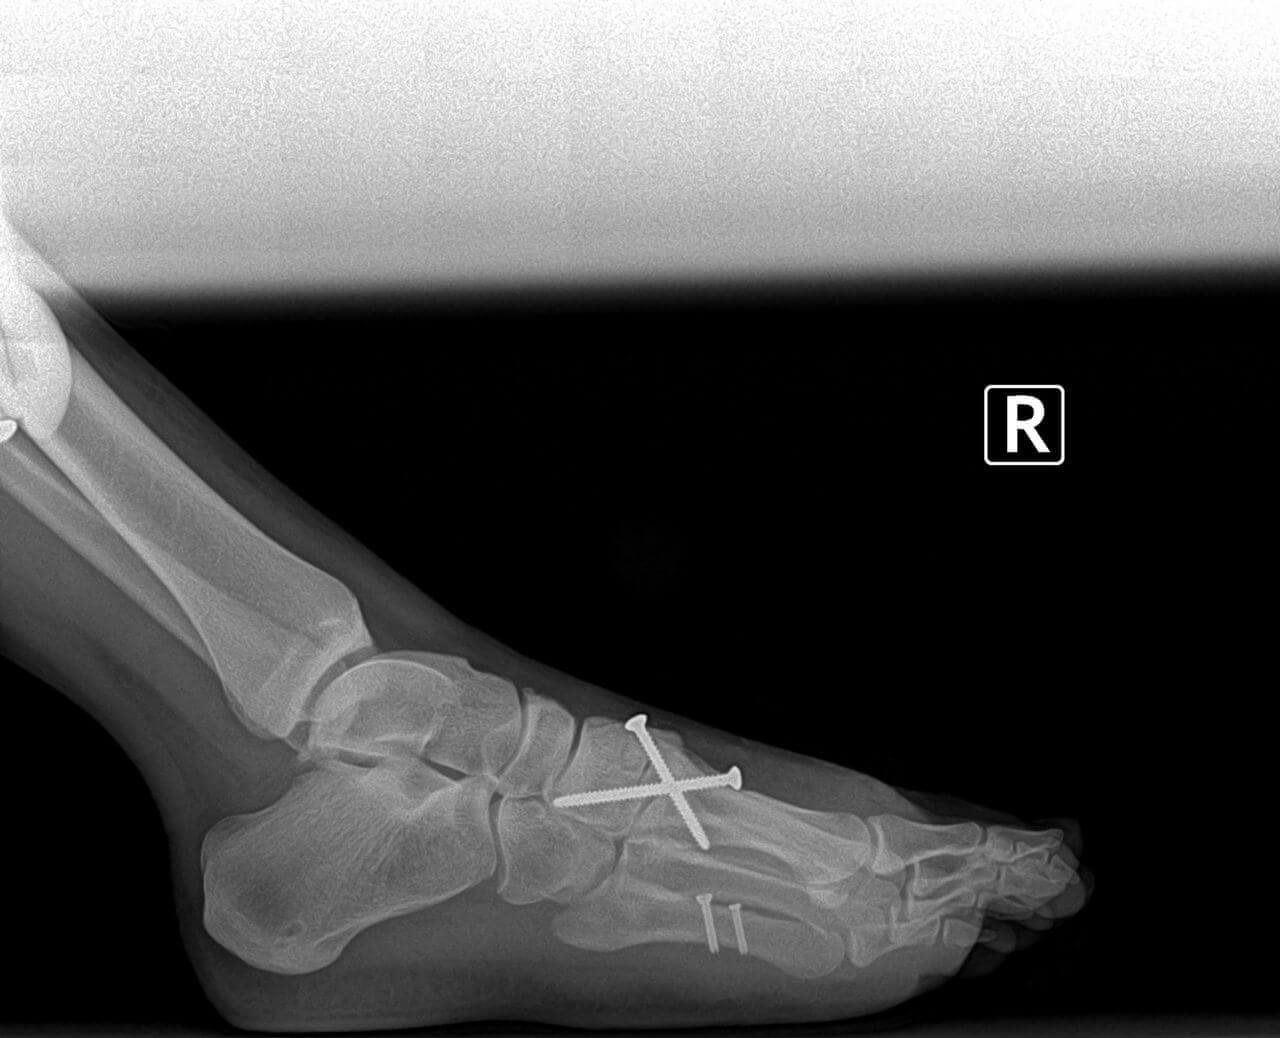 Bunion and tailor's bunion surgery, preoperative and postoperative x rays